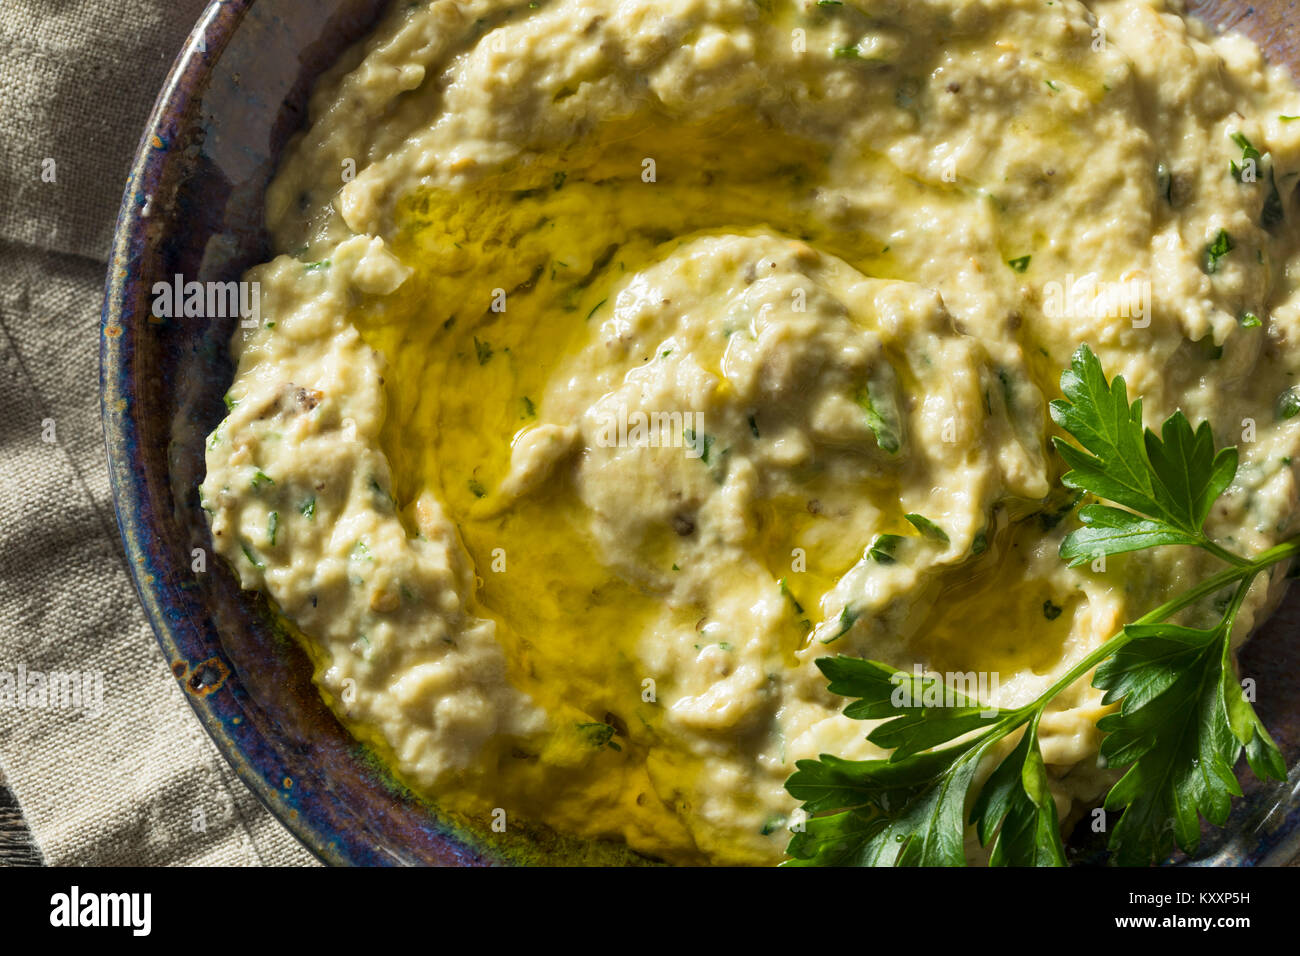 Savory Homemade Mediterranean Baba Ganoush with Olive OIl and Parsley Stock Photo